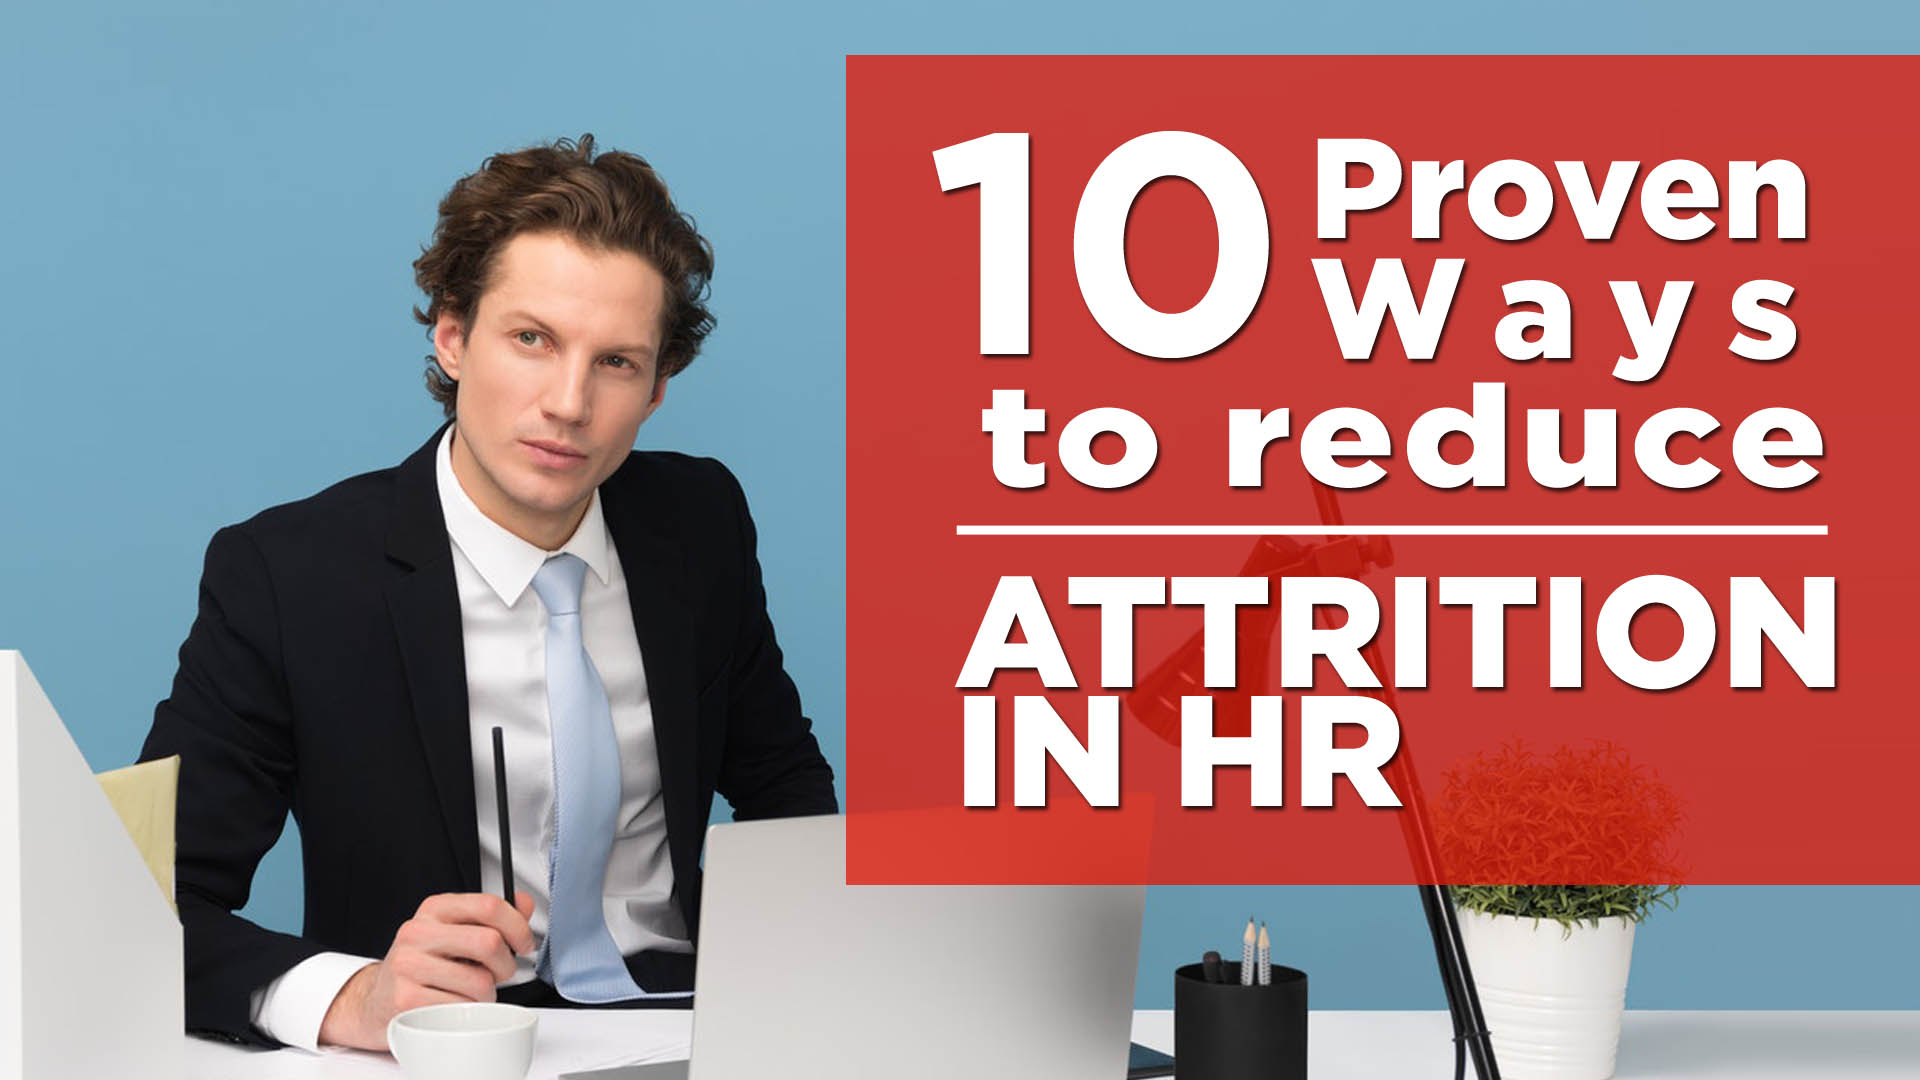 You are currently viewing 10 Proven Ways to Reduce Attrition in HR